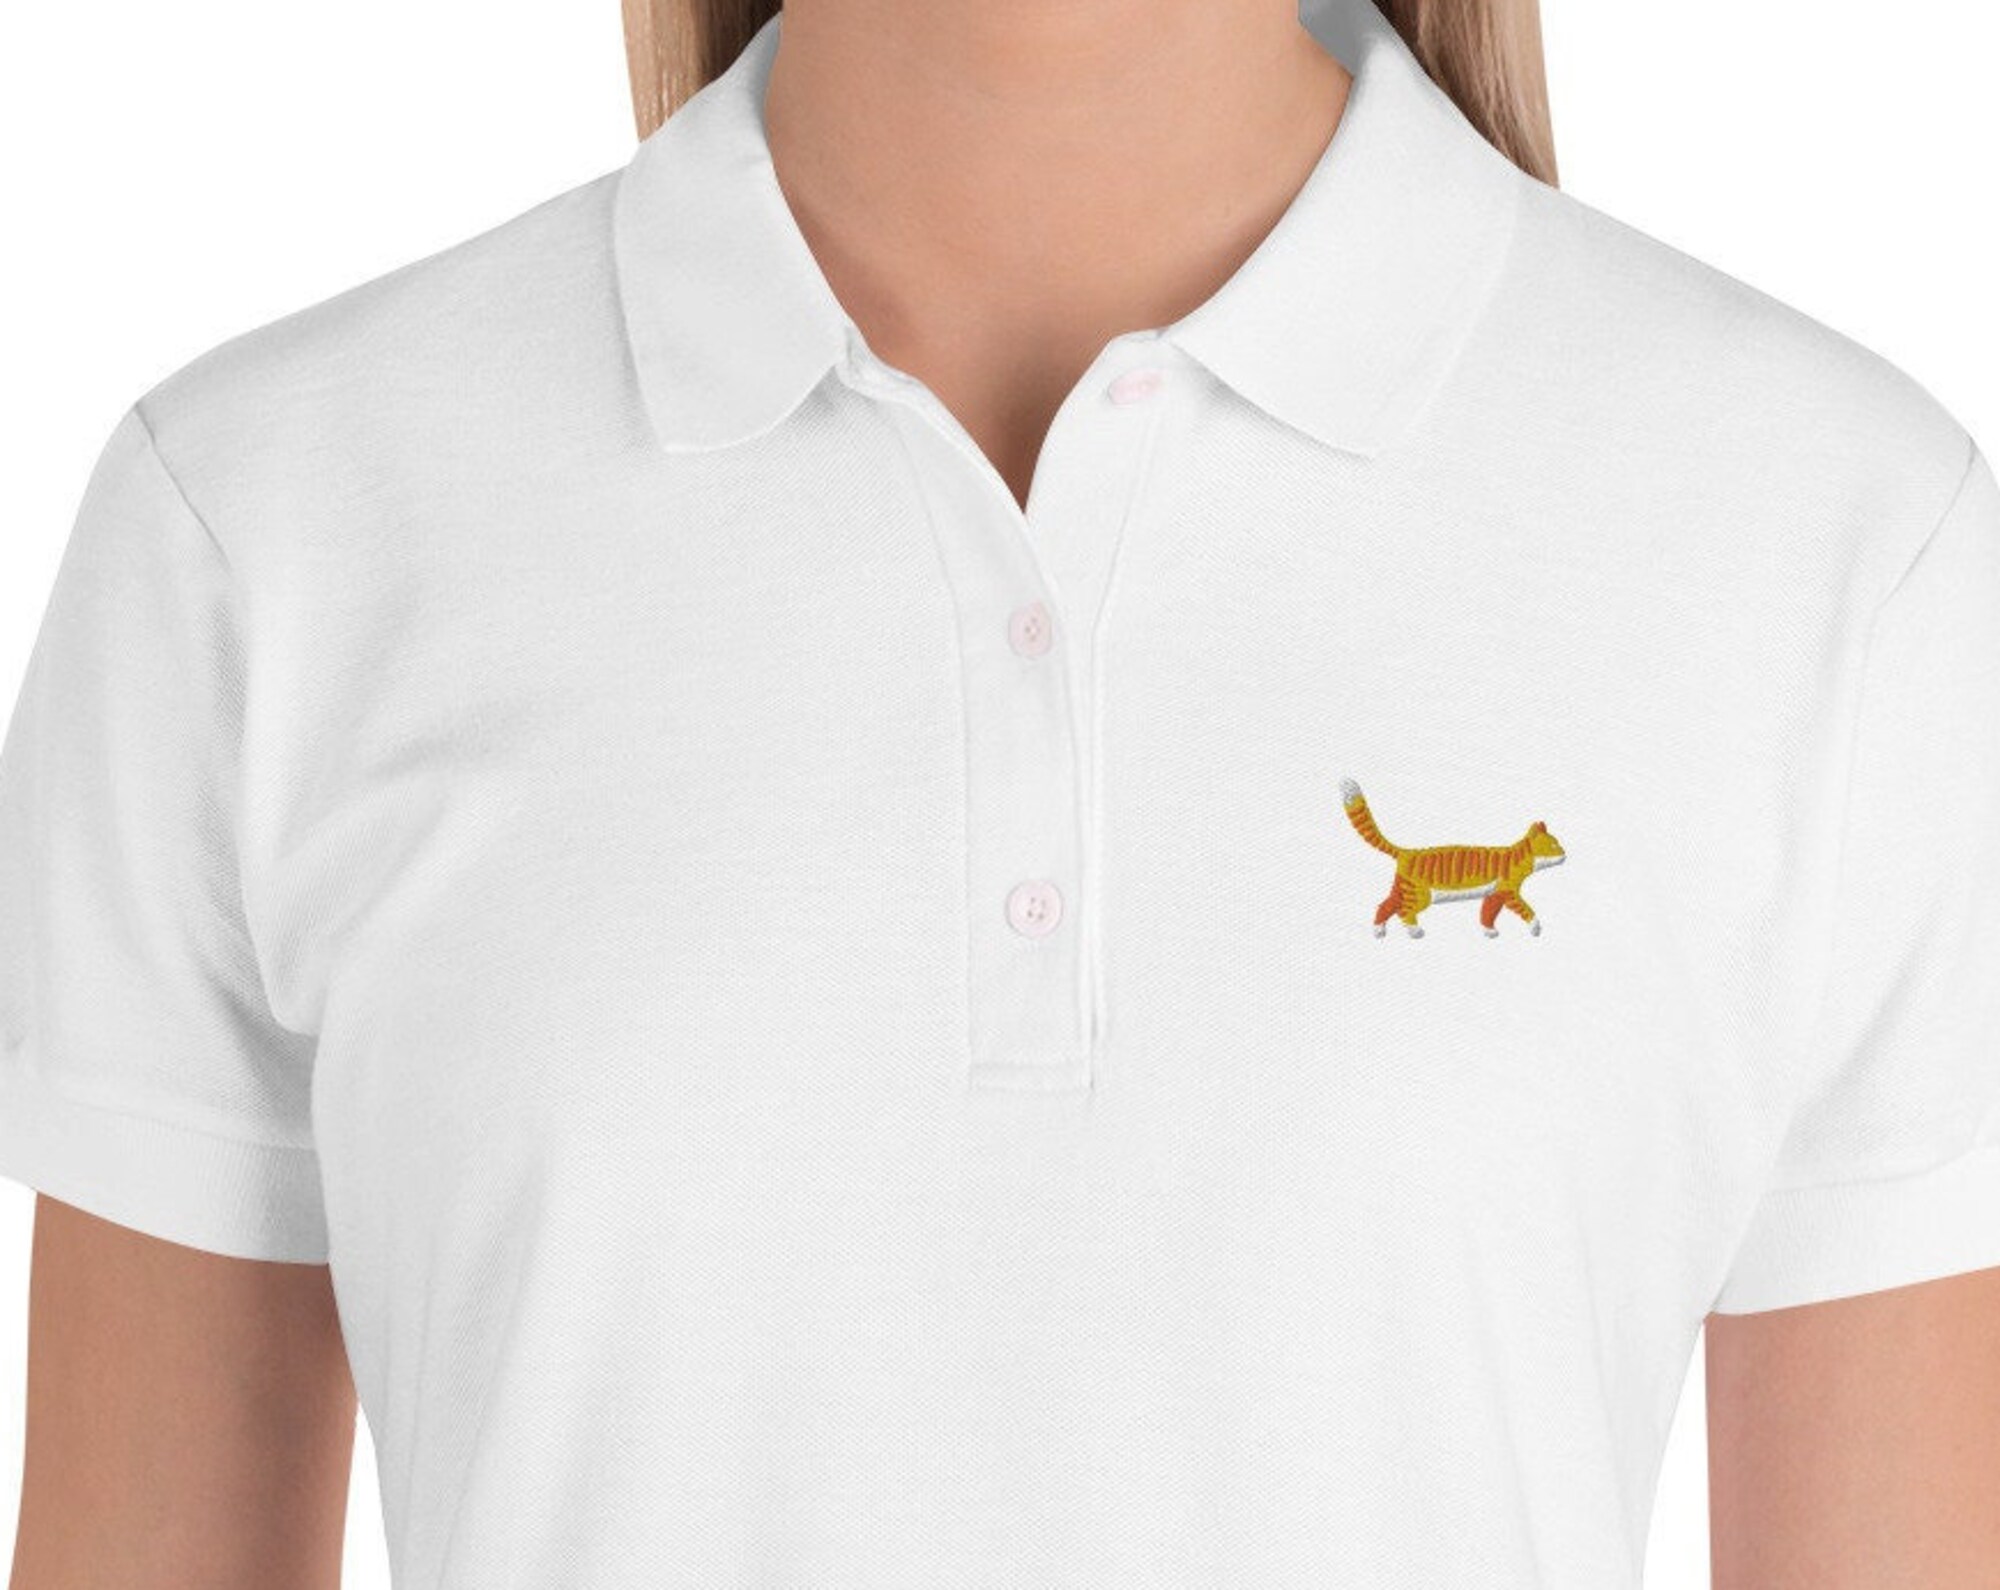 Tabby Cat Embroidered Women's Polo Shirt